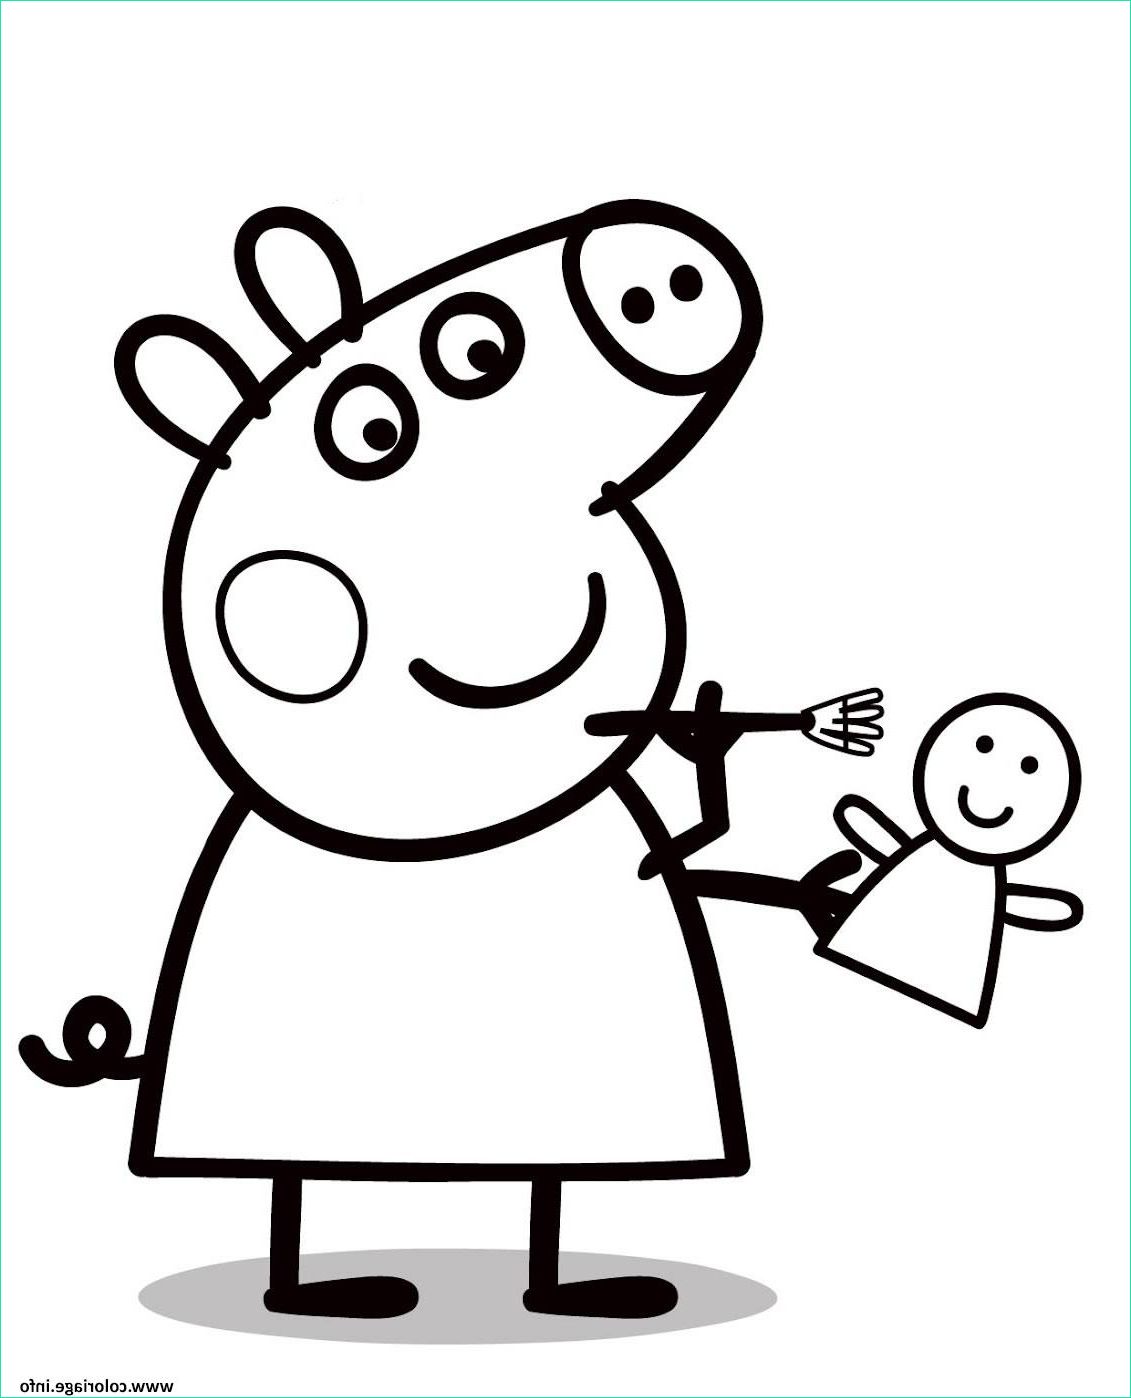 Coloriages Peppa Pig Inspirant Photos Coloriage Peppa Pig 69 Jecolorie